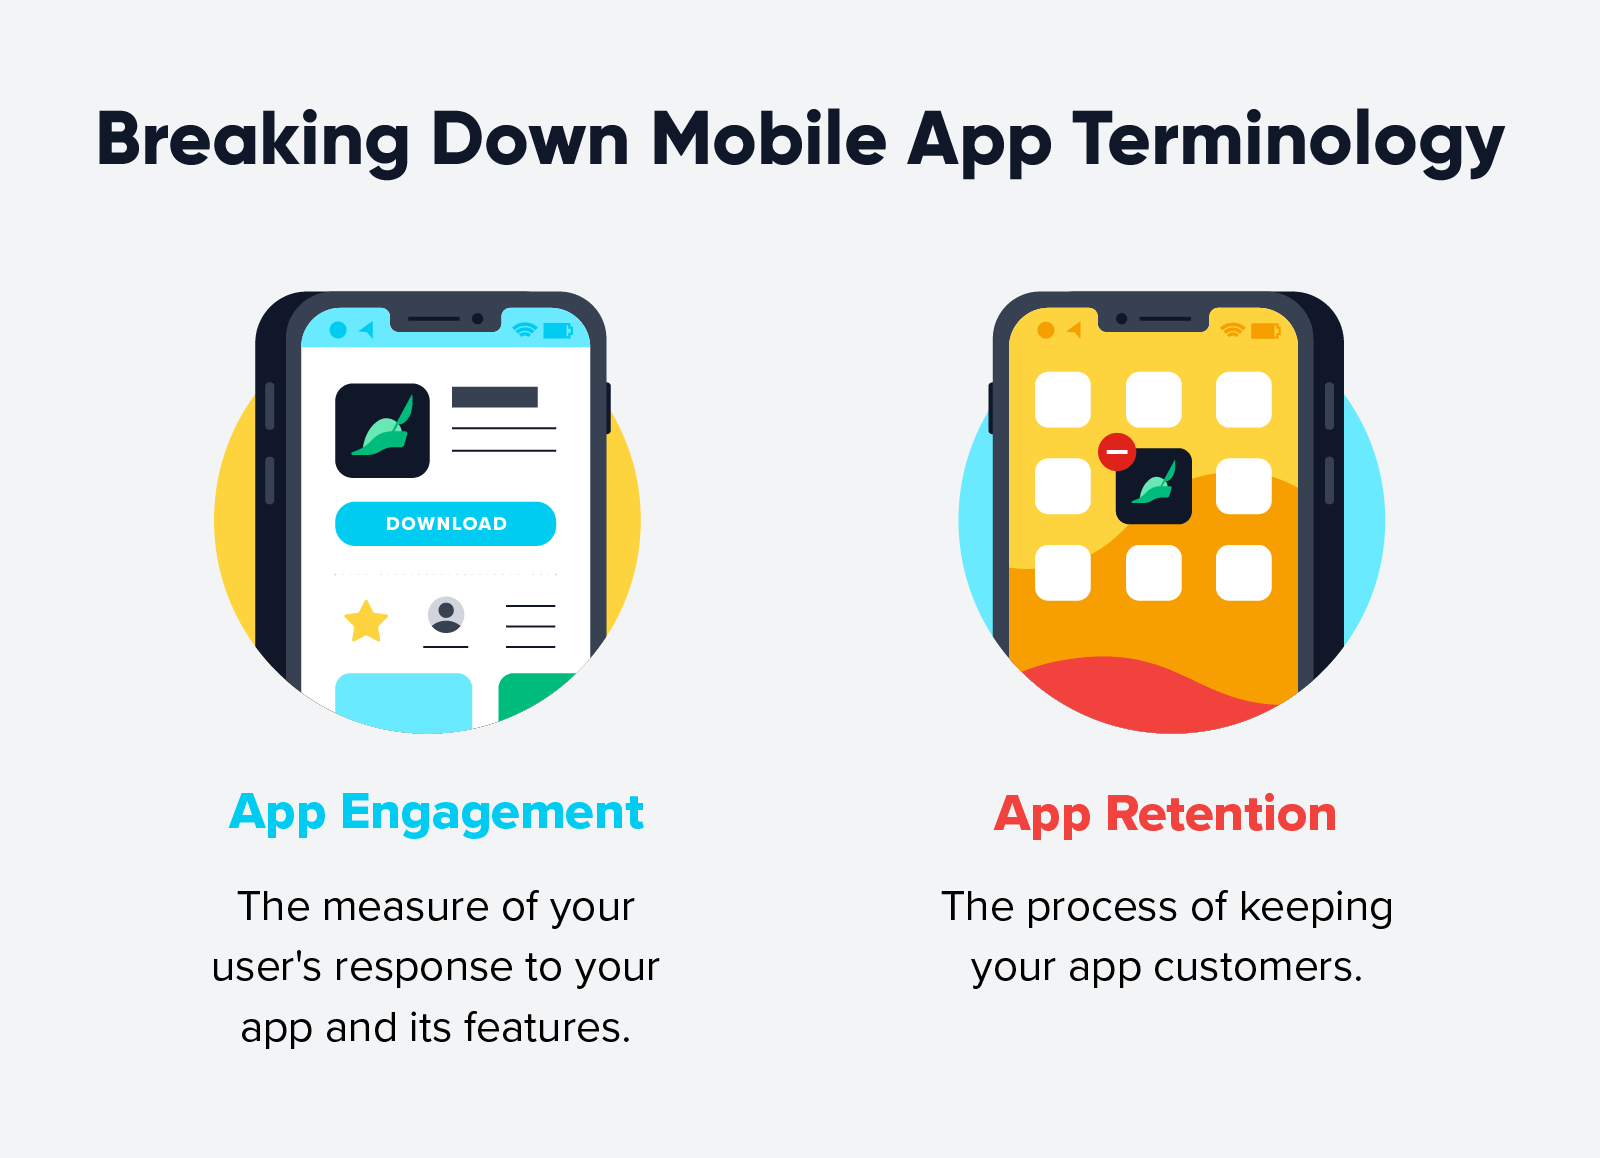 Defining mobile app engagement and app retention